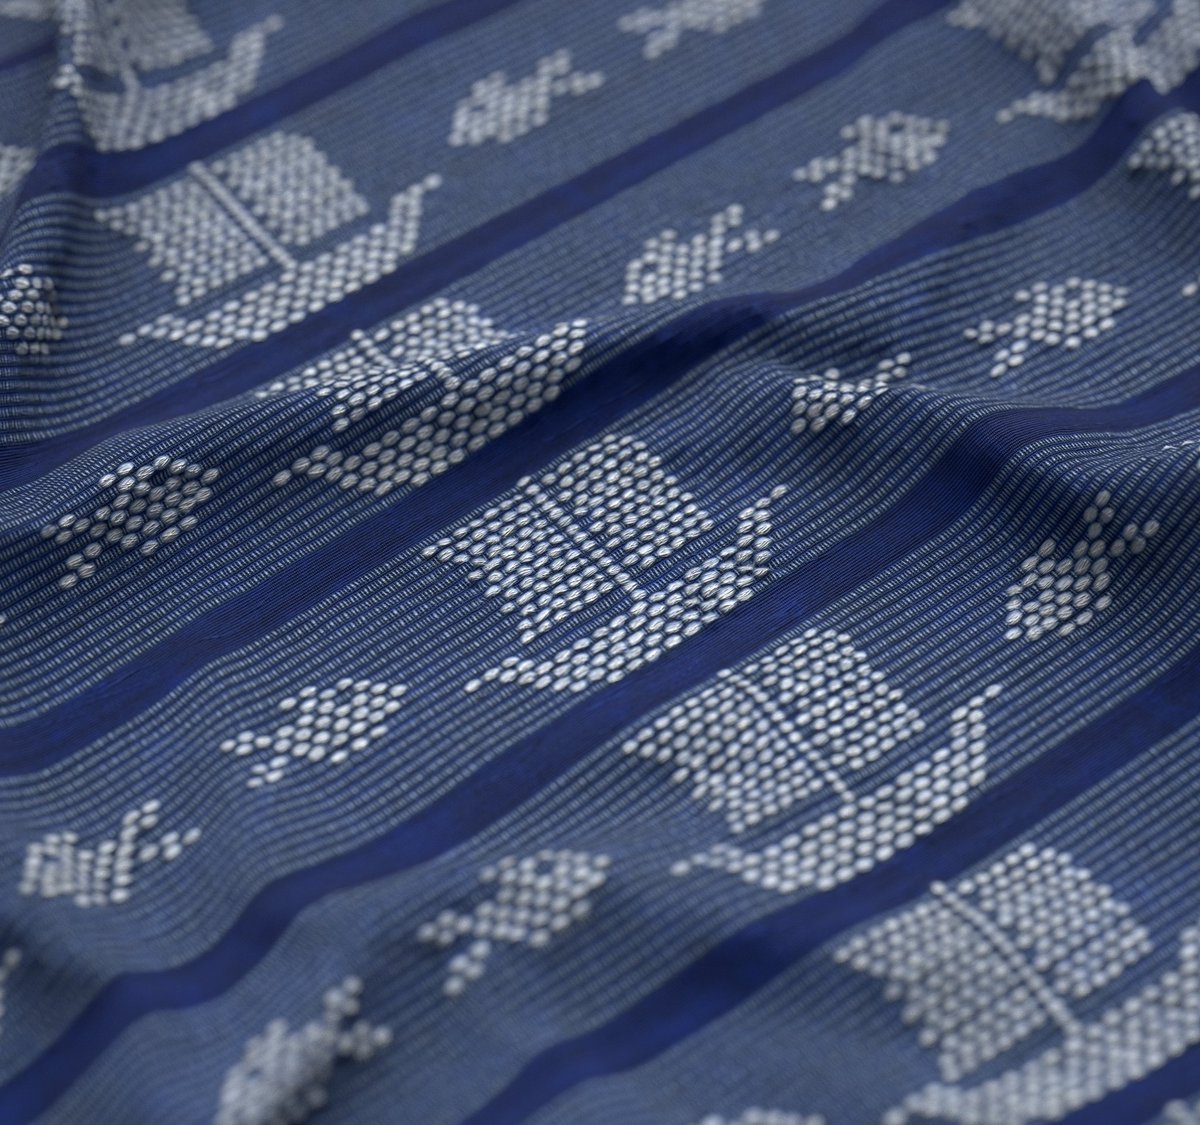 Hi! Reviving my twitter to post this Filipino Pinilian textile I created in Substance Designer. This particular textile is from the Ilocos Region and I'm planning on recreating at least one textile from every region.

#artph #SubstanceDesigner